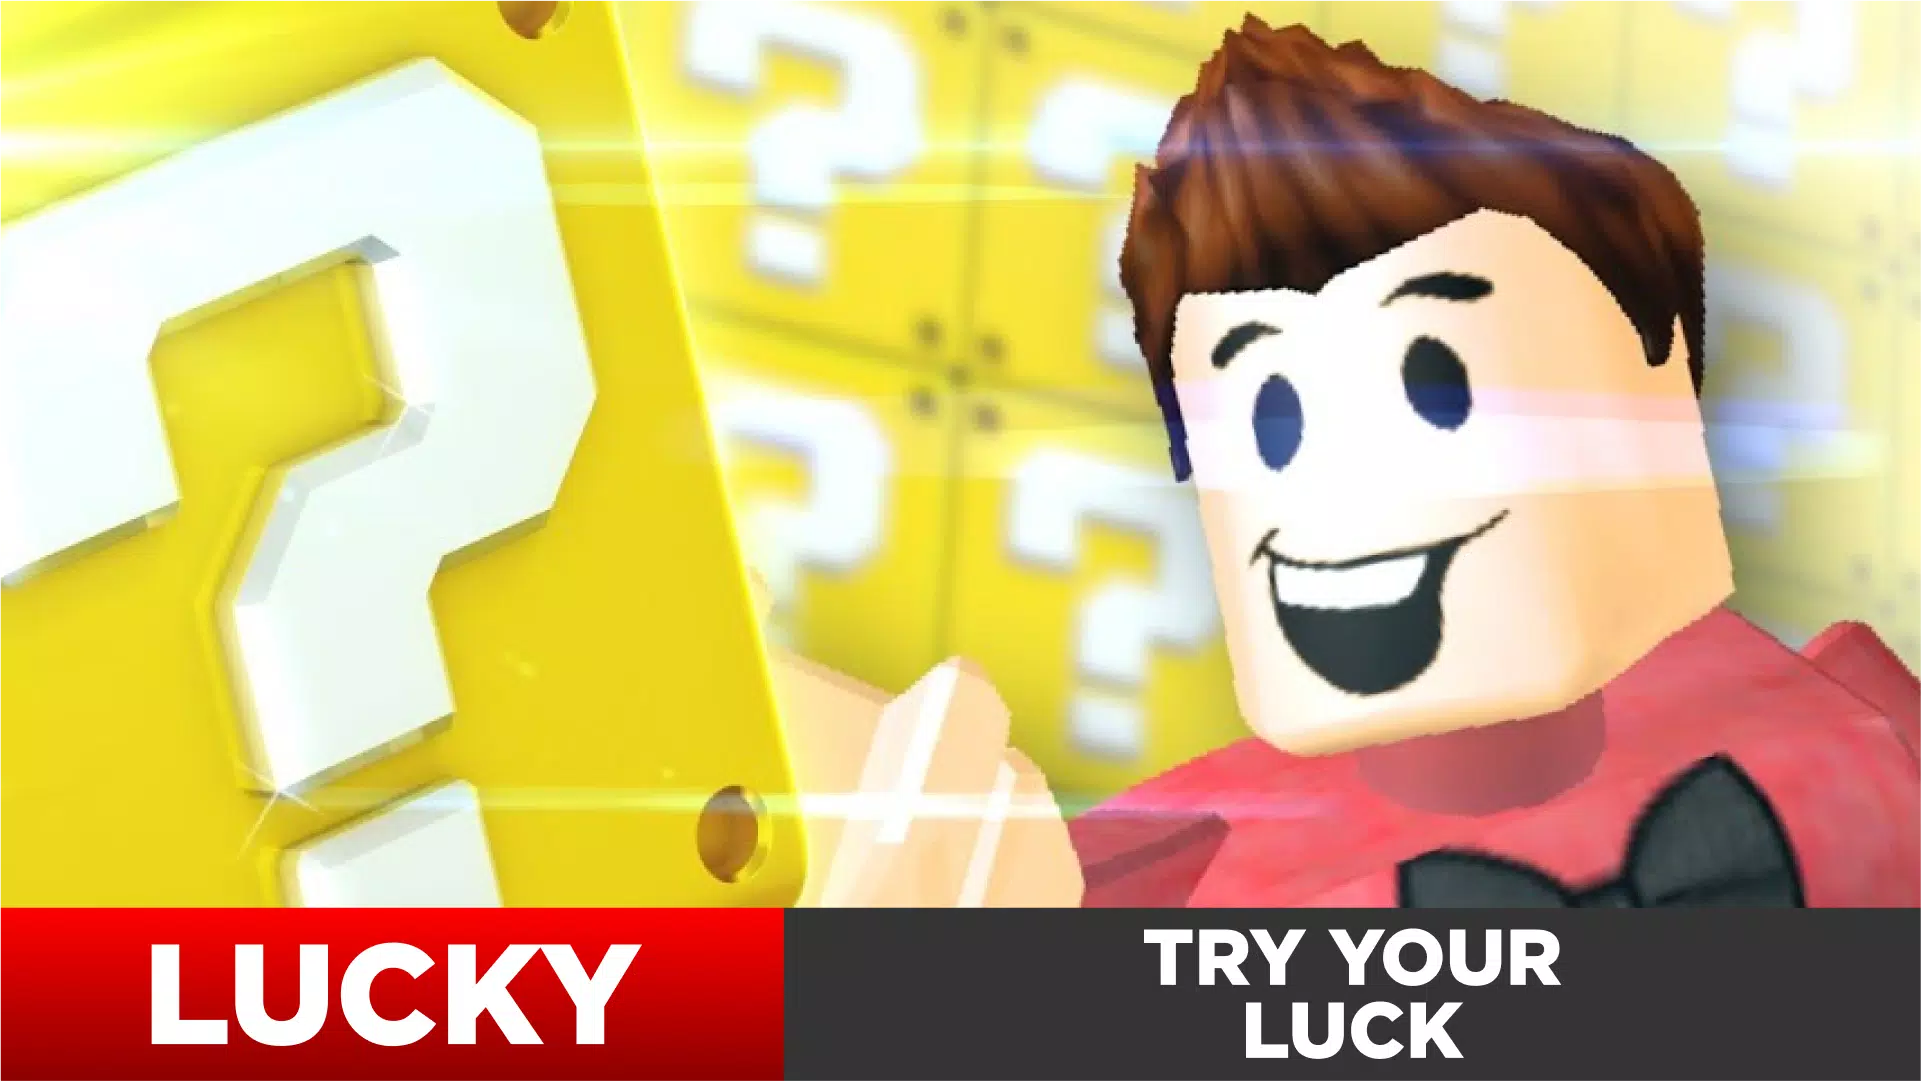 Download Lucky block mods for roblox android on PC